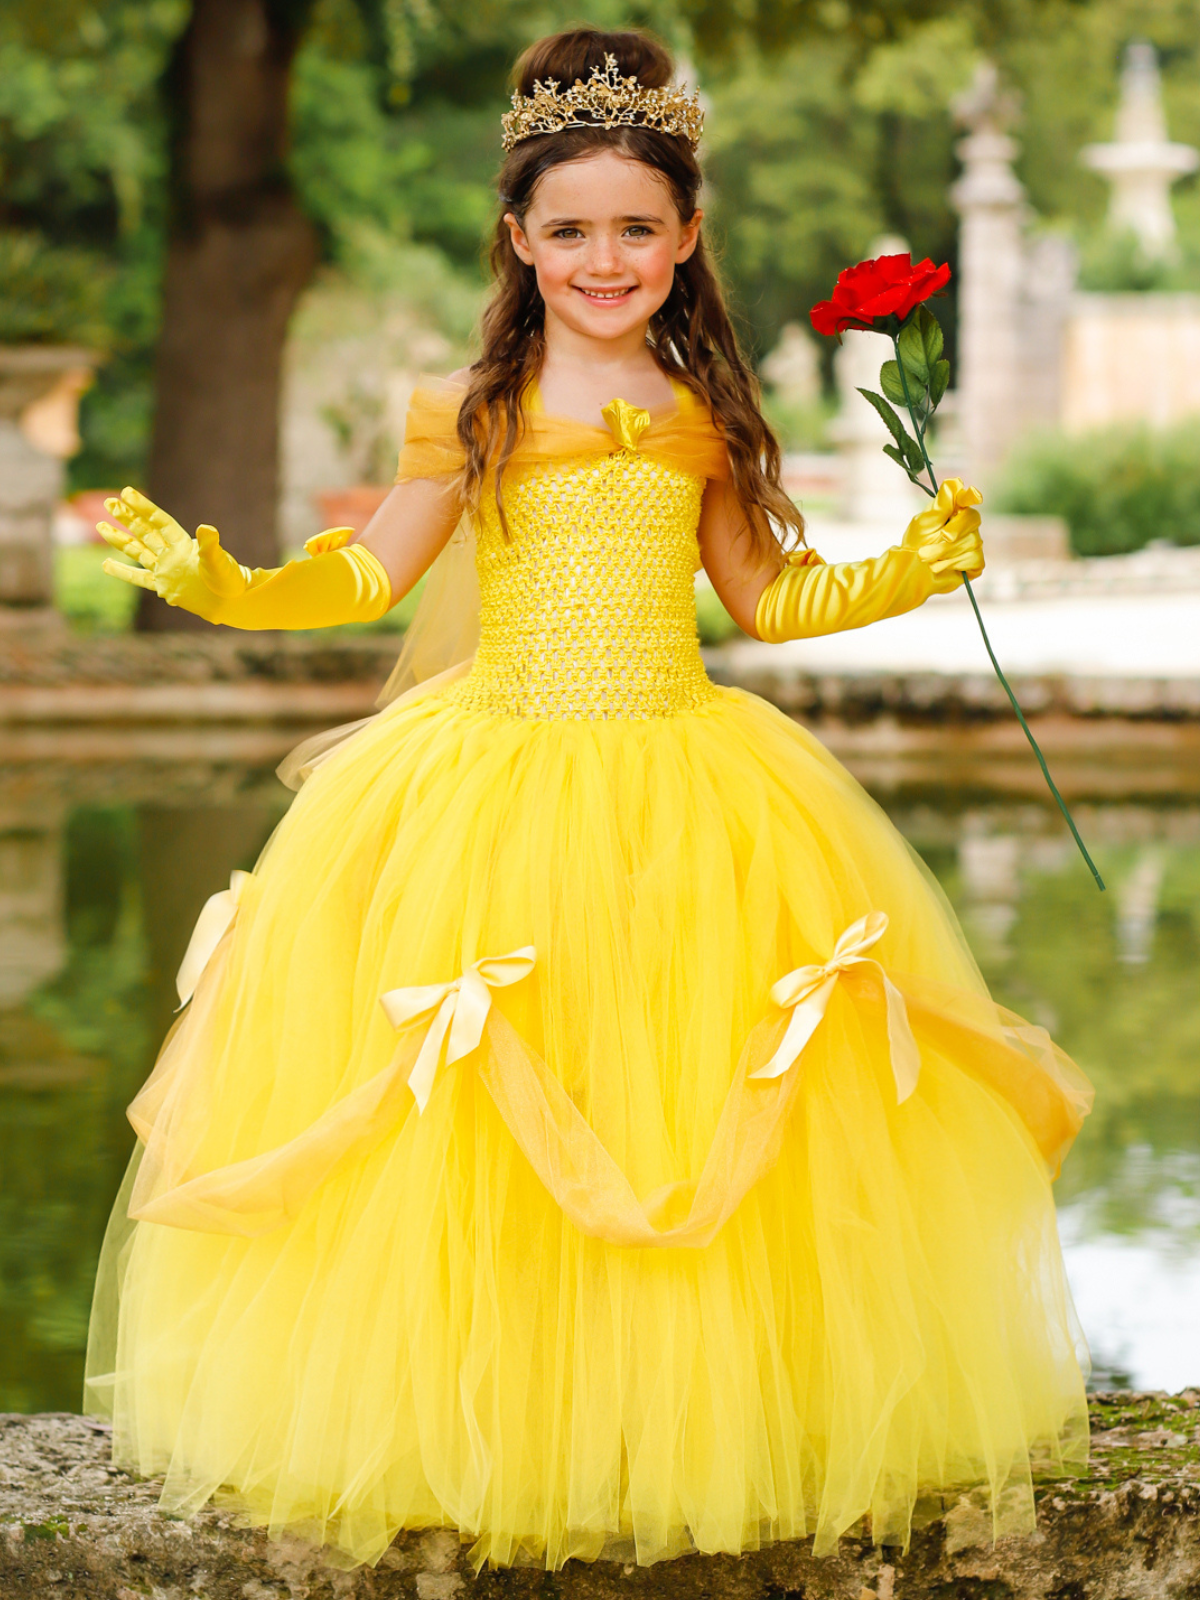 Ball gown dresses - Beautiful dresses for girls